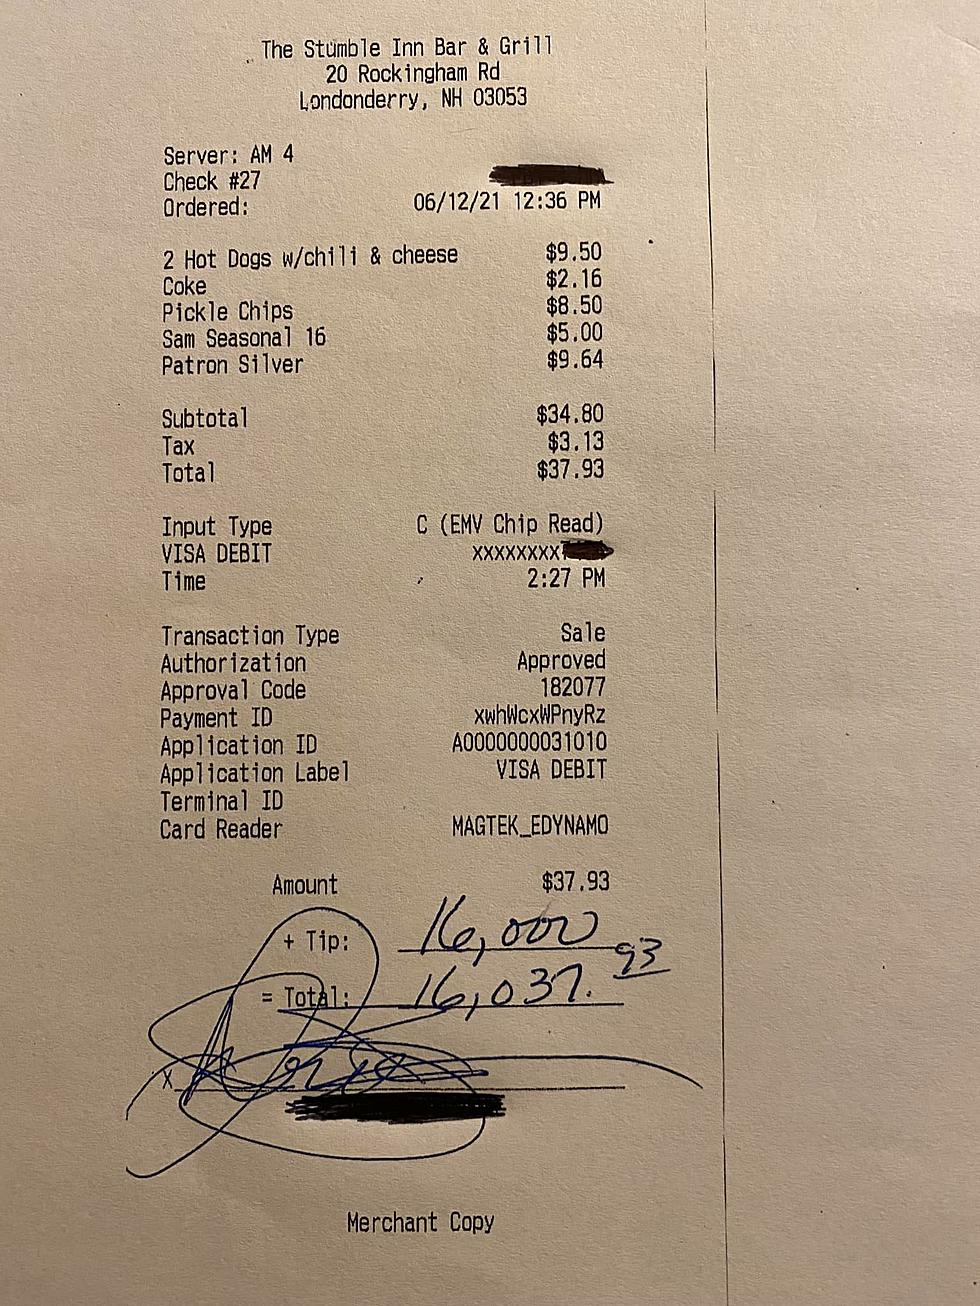 $16,000 Tip Left at a Bar in Londonderry New Hampshire